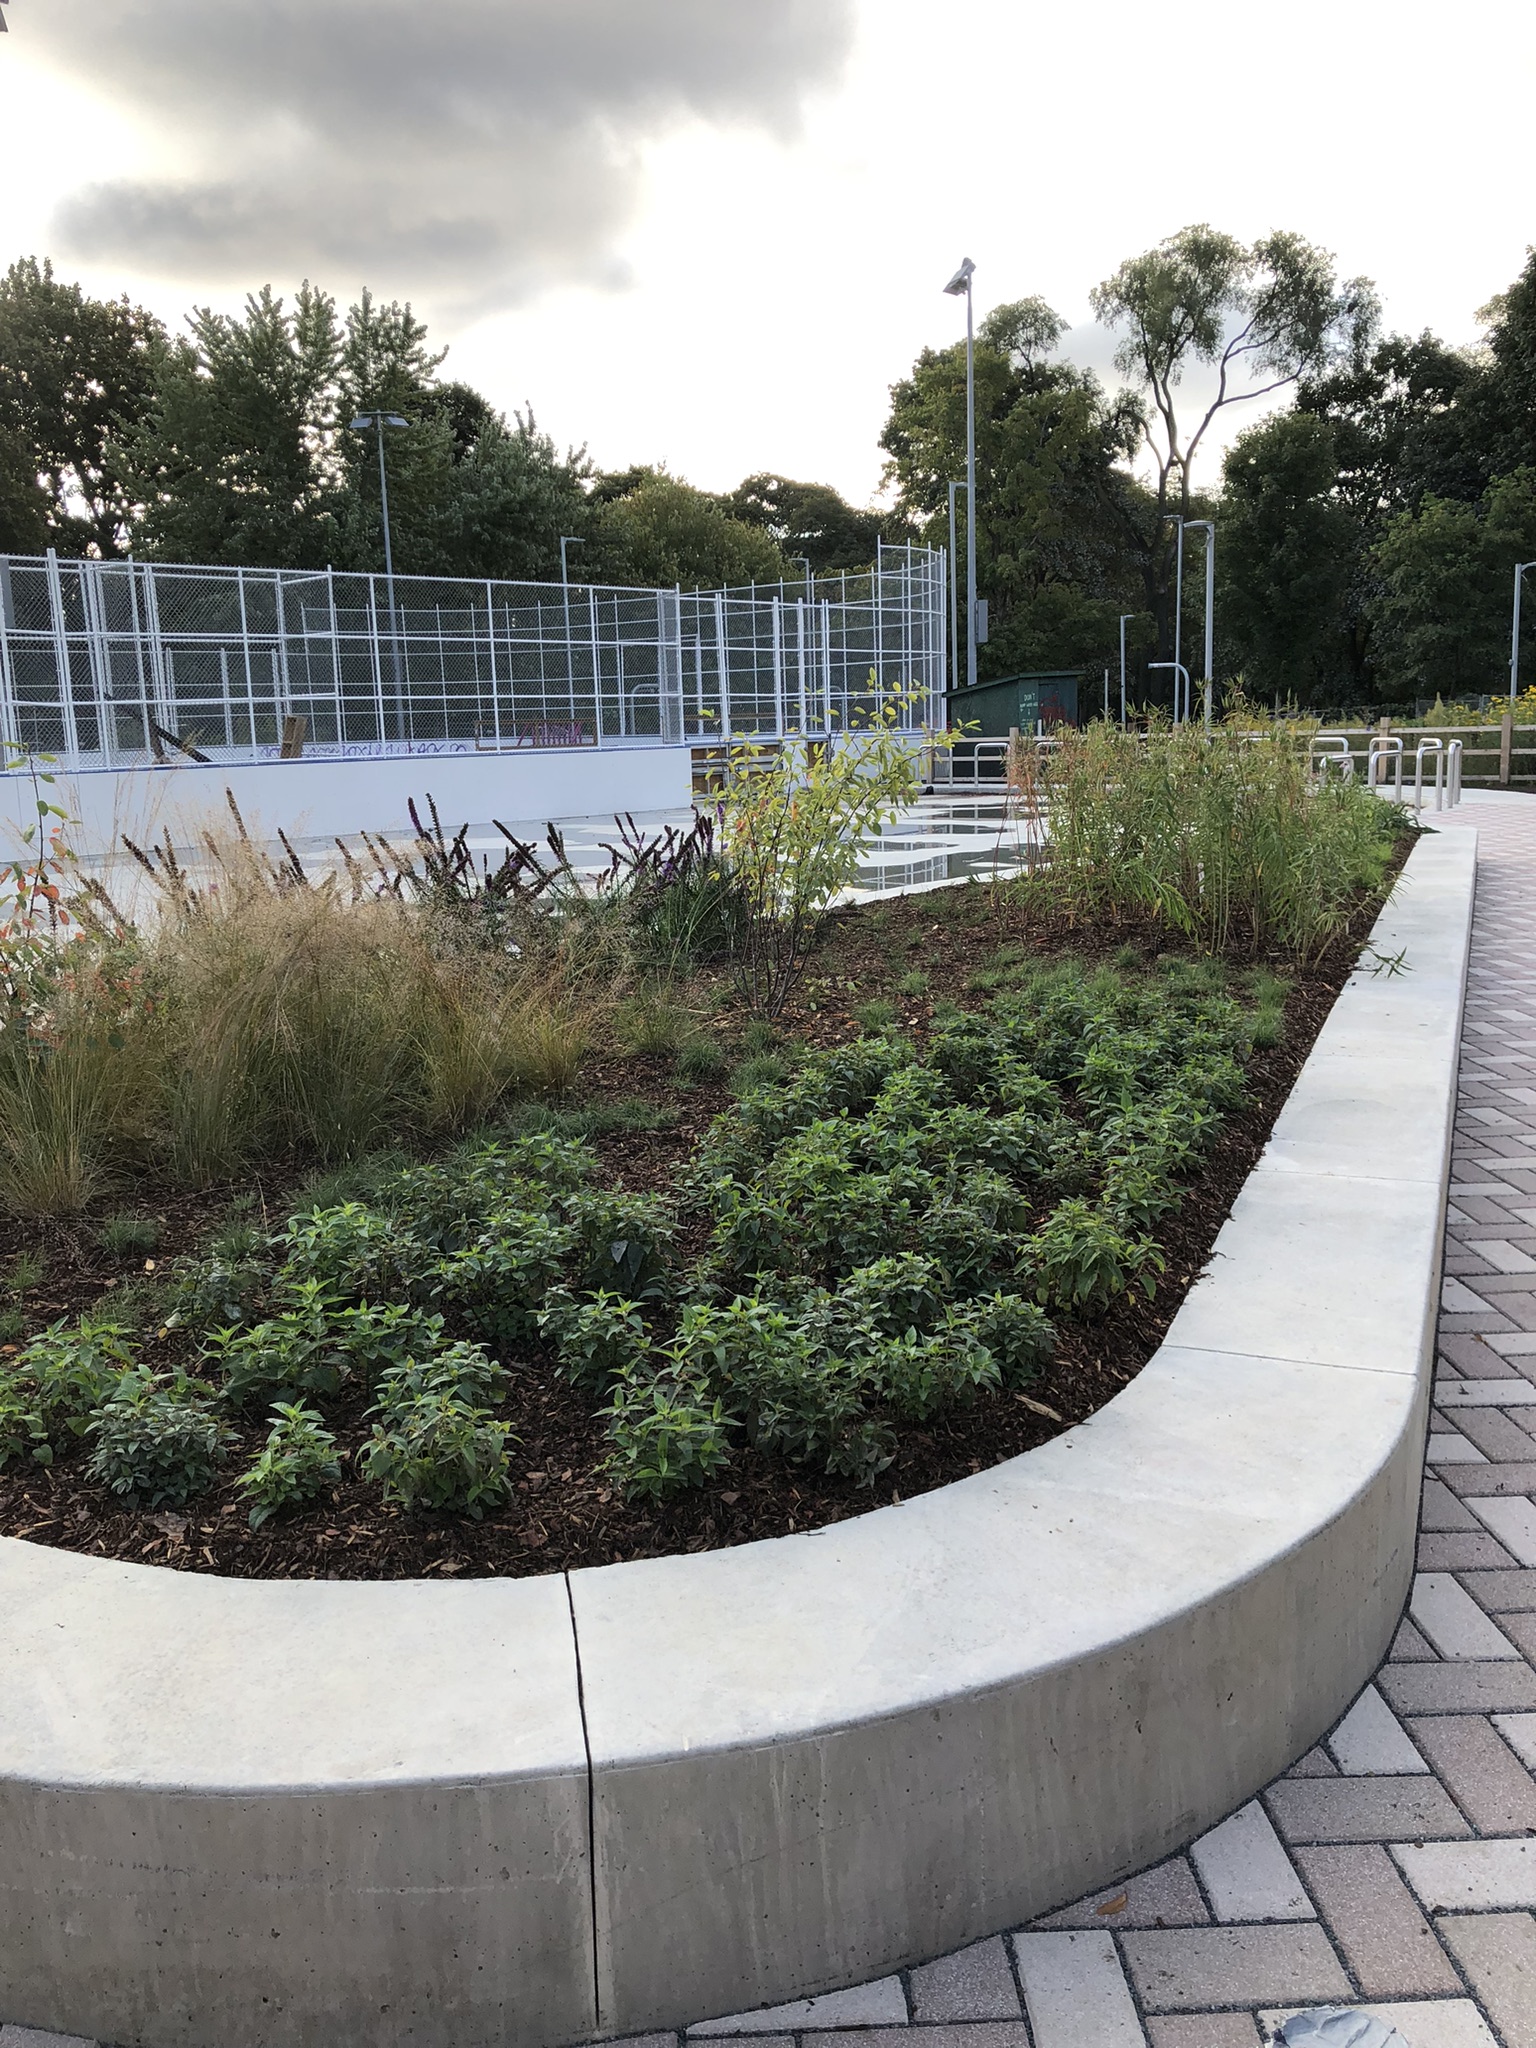 A planting bed with a curved concrete border, filled with native and pollinator plantings and edible and fruit-bearing species. The ice rink can be seen in the background. 